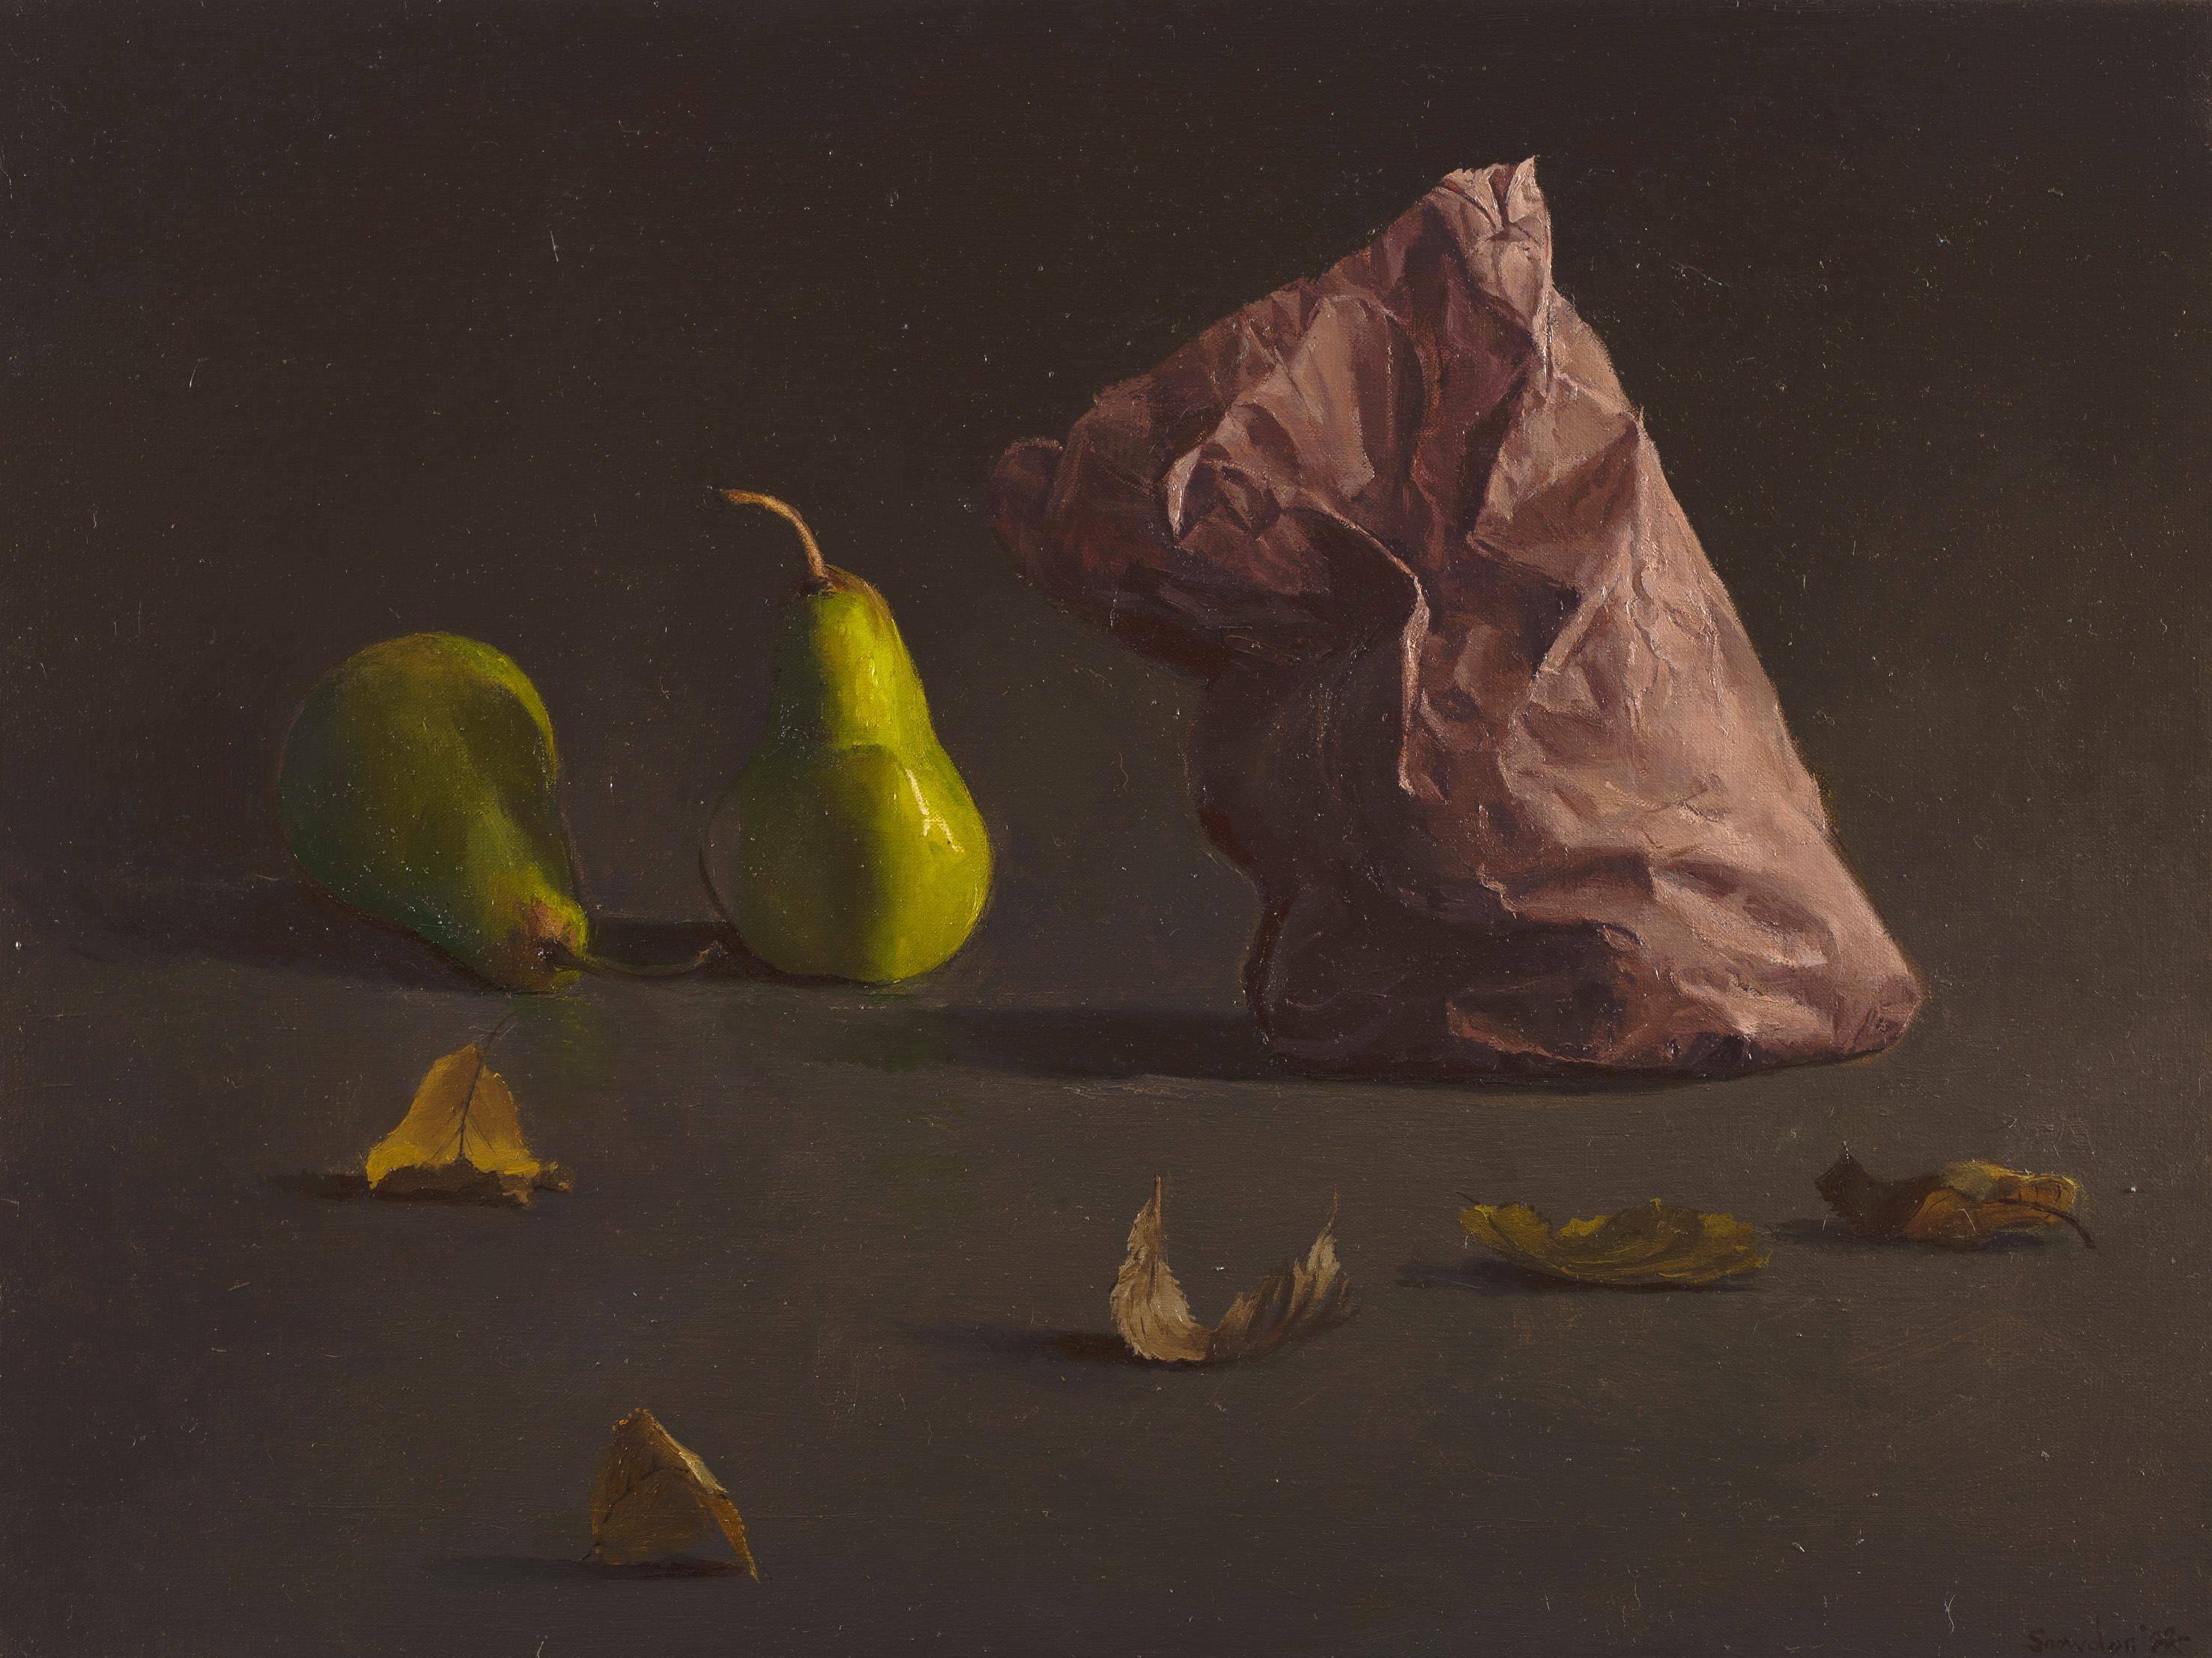 Original artwork on linen by established Australian painter Tim Snowdon. 

Snowdon's  2022 exhibition ‘Conversations’ references the way inanimate objects ‘speak to’ each other within still life compositions and can appear animate or to ‘take on a